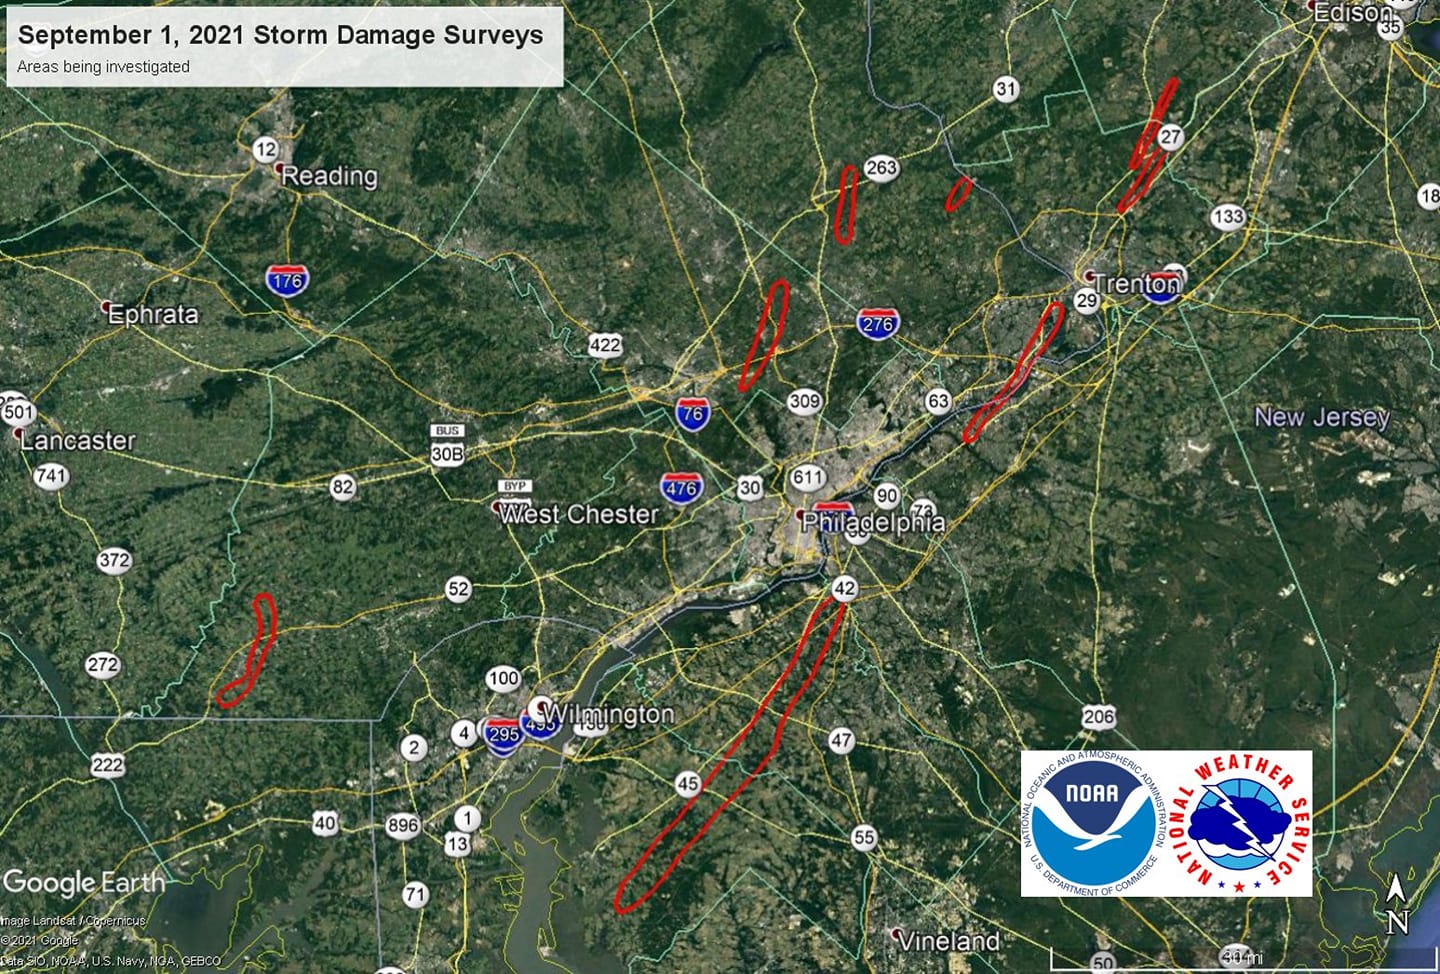 The National Weather Service mapped out other areas being investigated for tornado touch-downs from Major Hurricane Ida's remnants.  Image: NWS